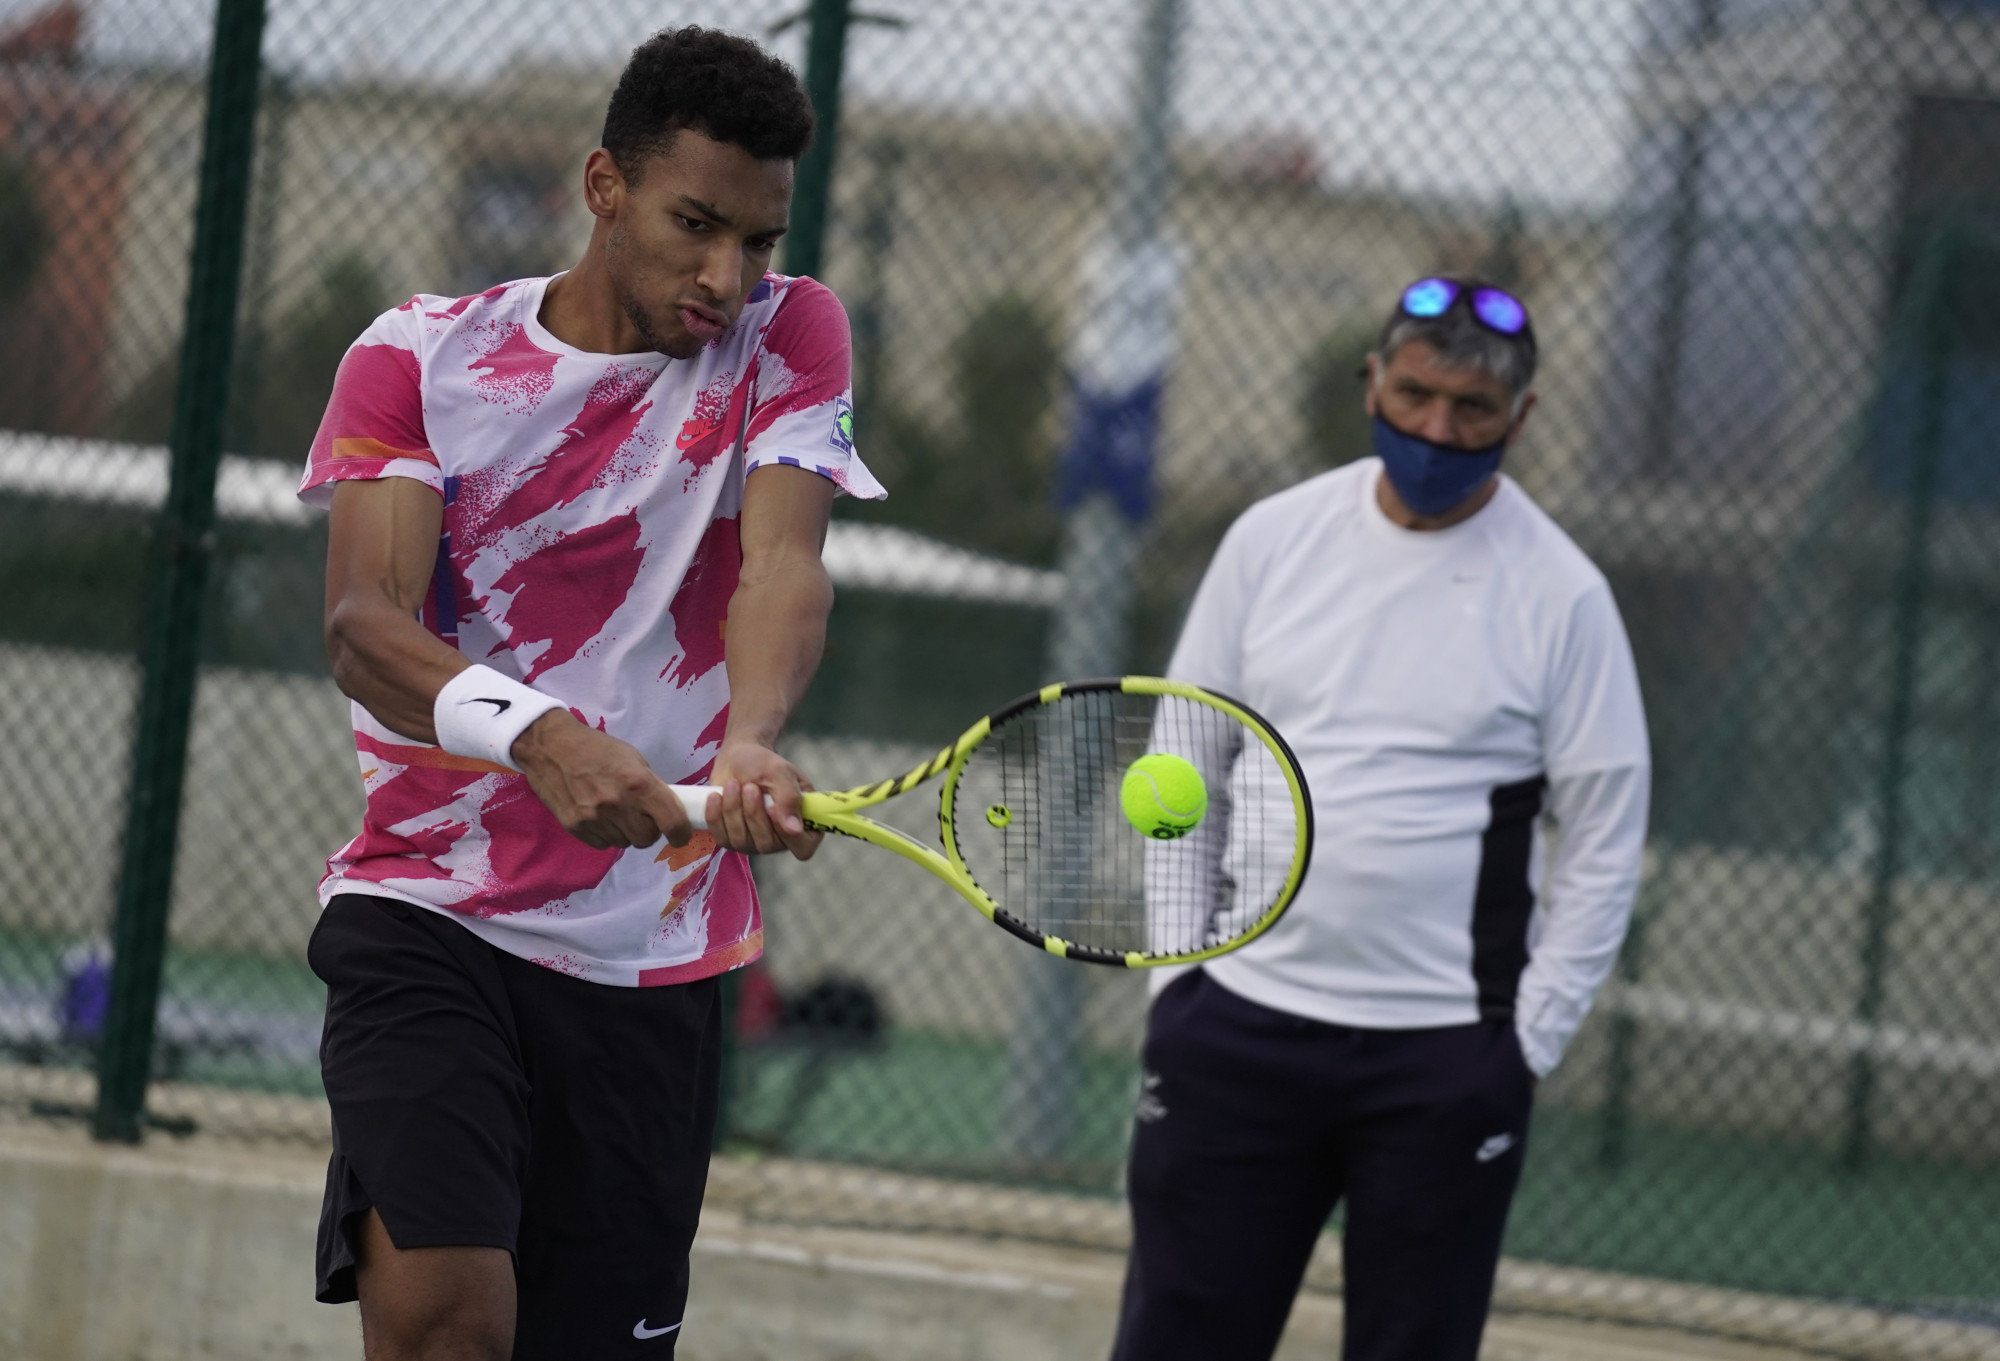 Auger-Aliassime, Sonego and Ruusuvuori train at the Rafa Nadal Academy by Movistar